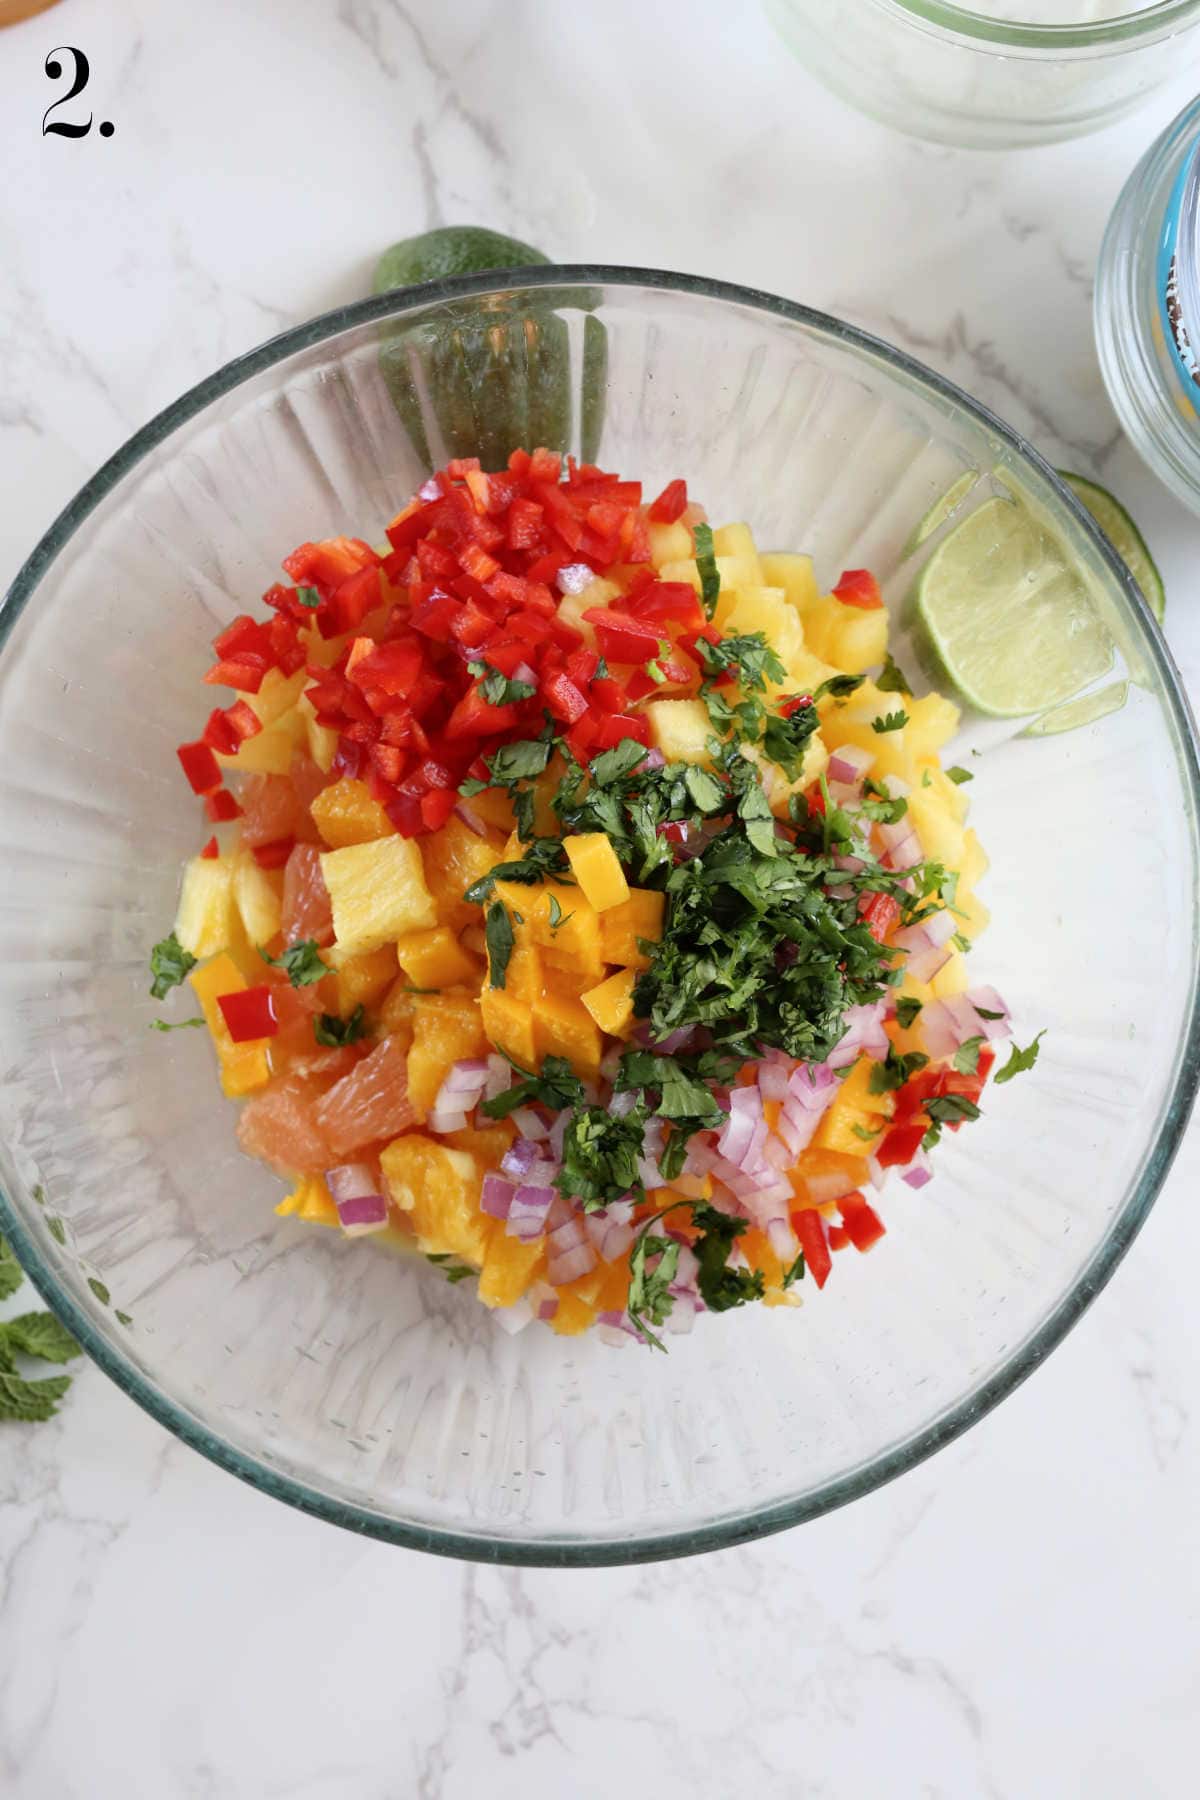 Citrus salsa with orange fruit and grapefruit in a mixing bowl.